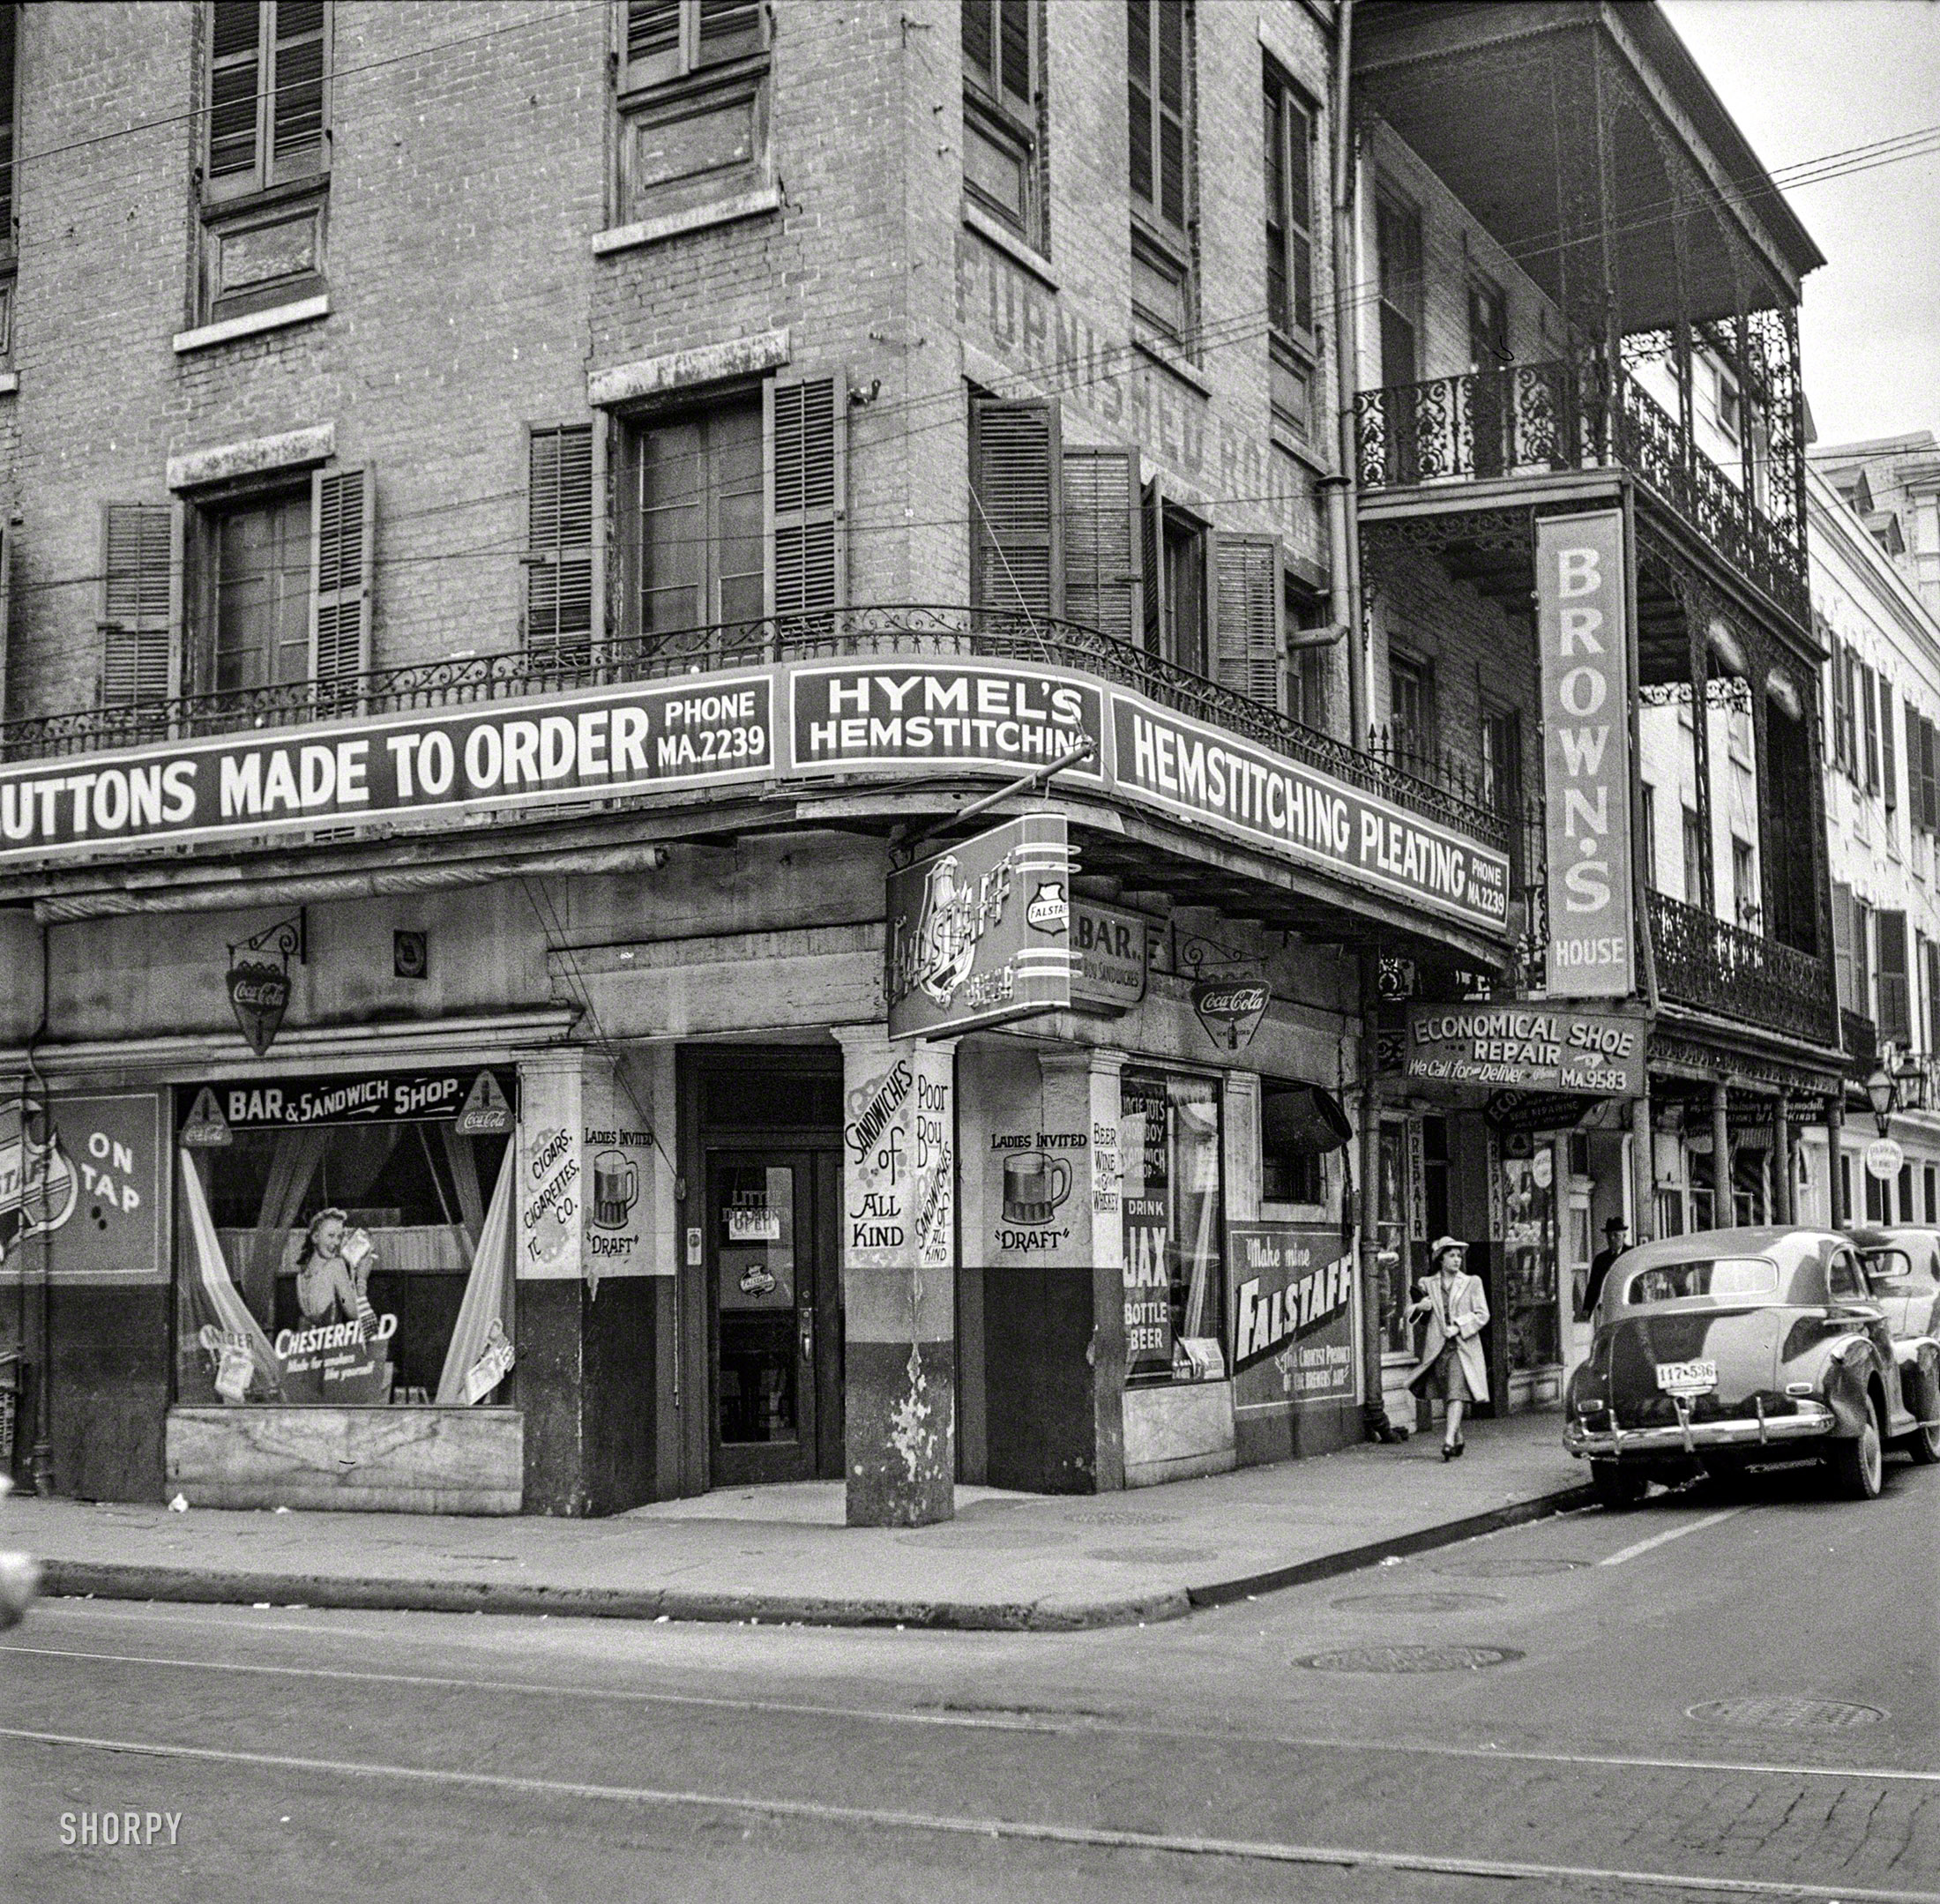 January 1941. "Old buildings in New Orleans." Custom Buttons and "Sandwiches of All Kind." Photo by Marion Post Wolcott. View full size.